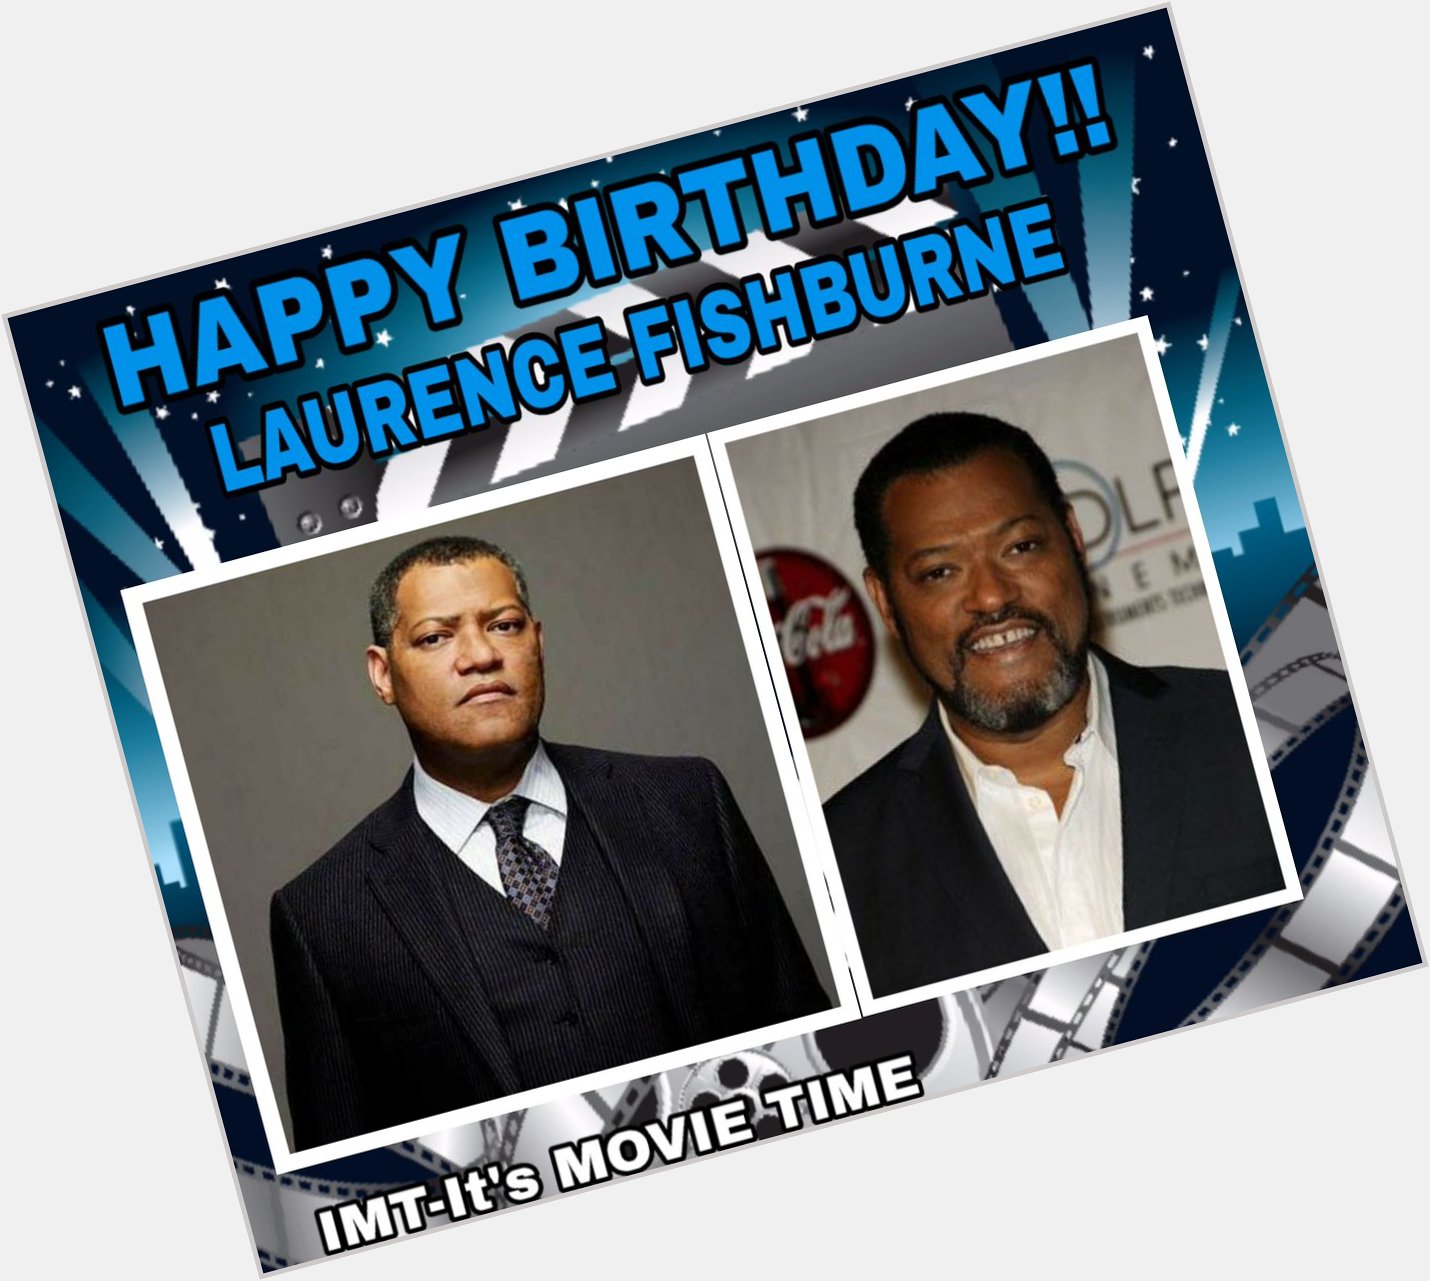 Happy Birthday to Laurence Fishburne! The actor is celebrating 59 years. 